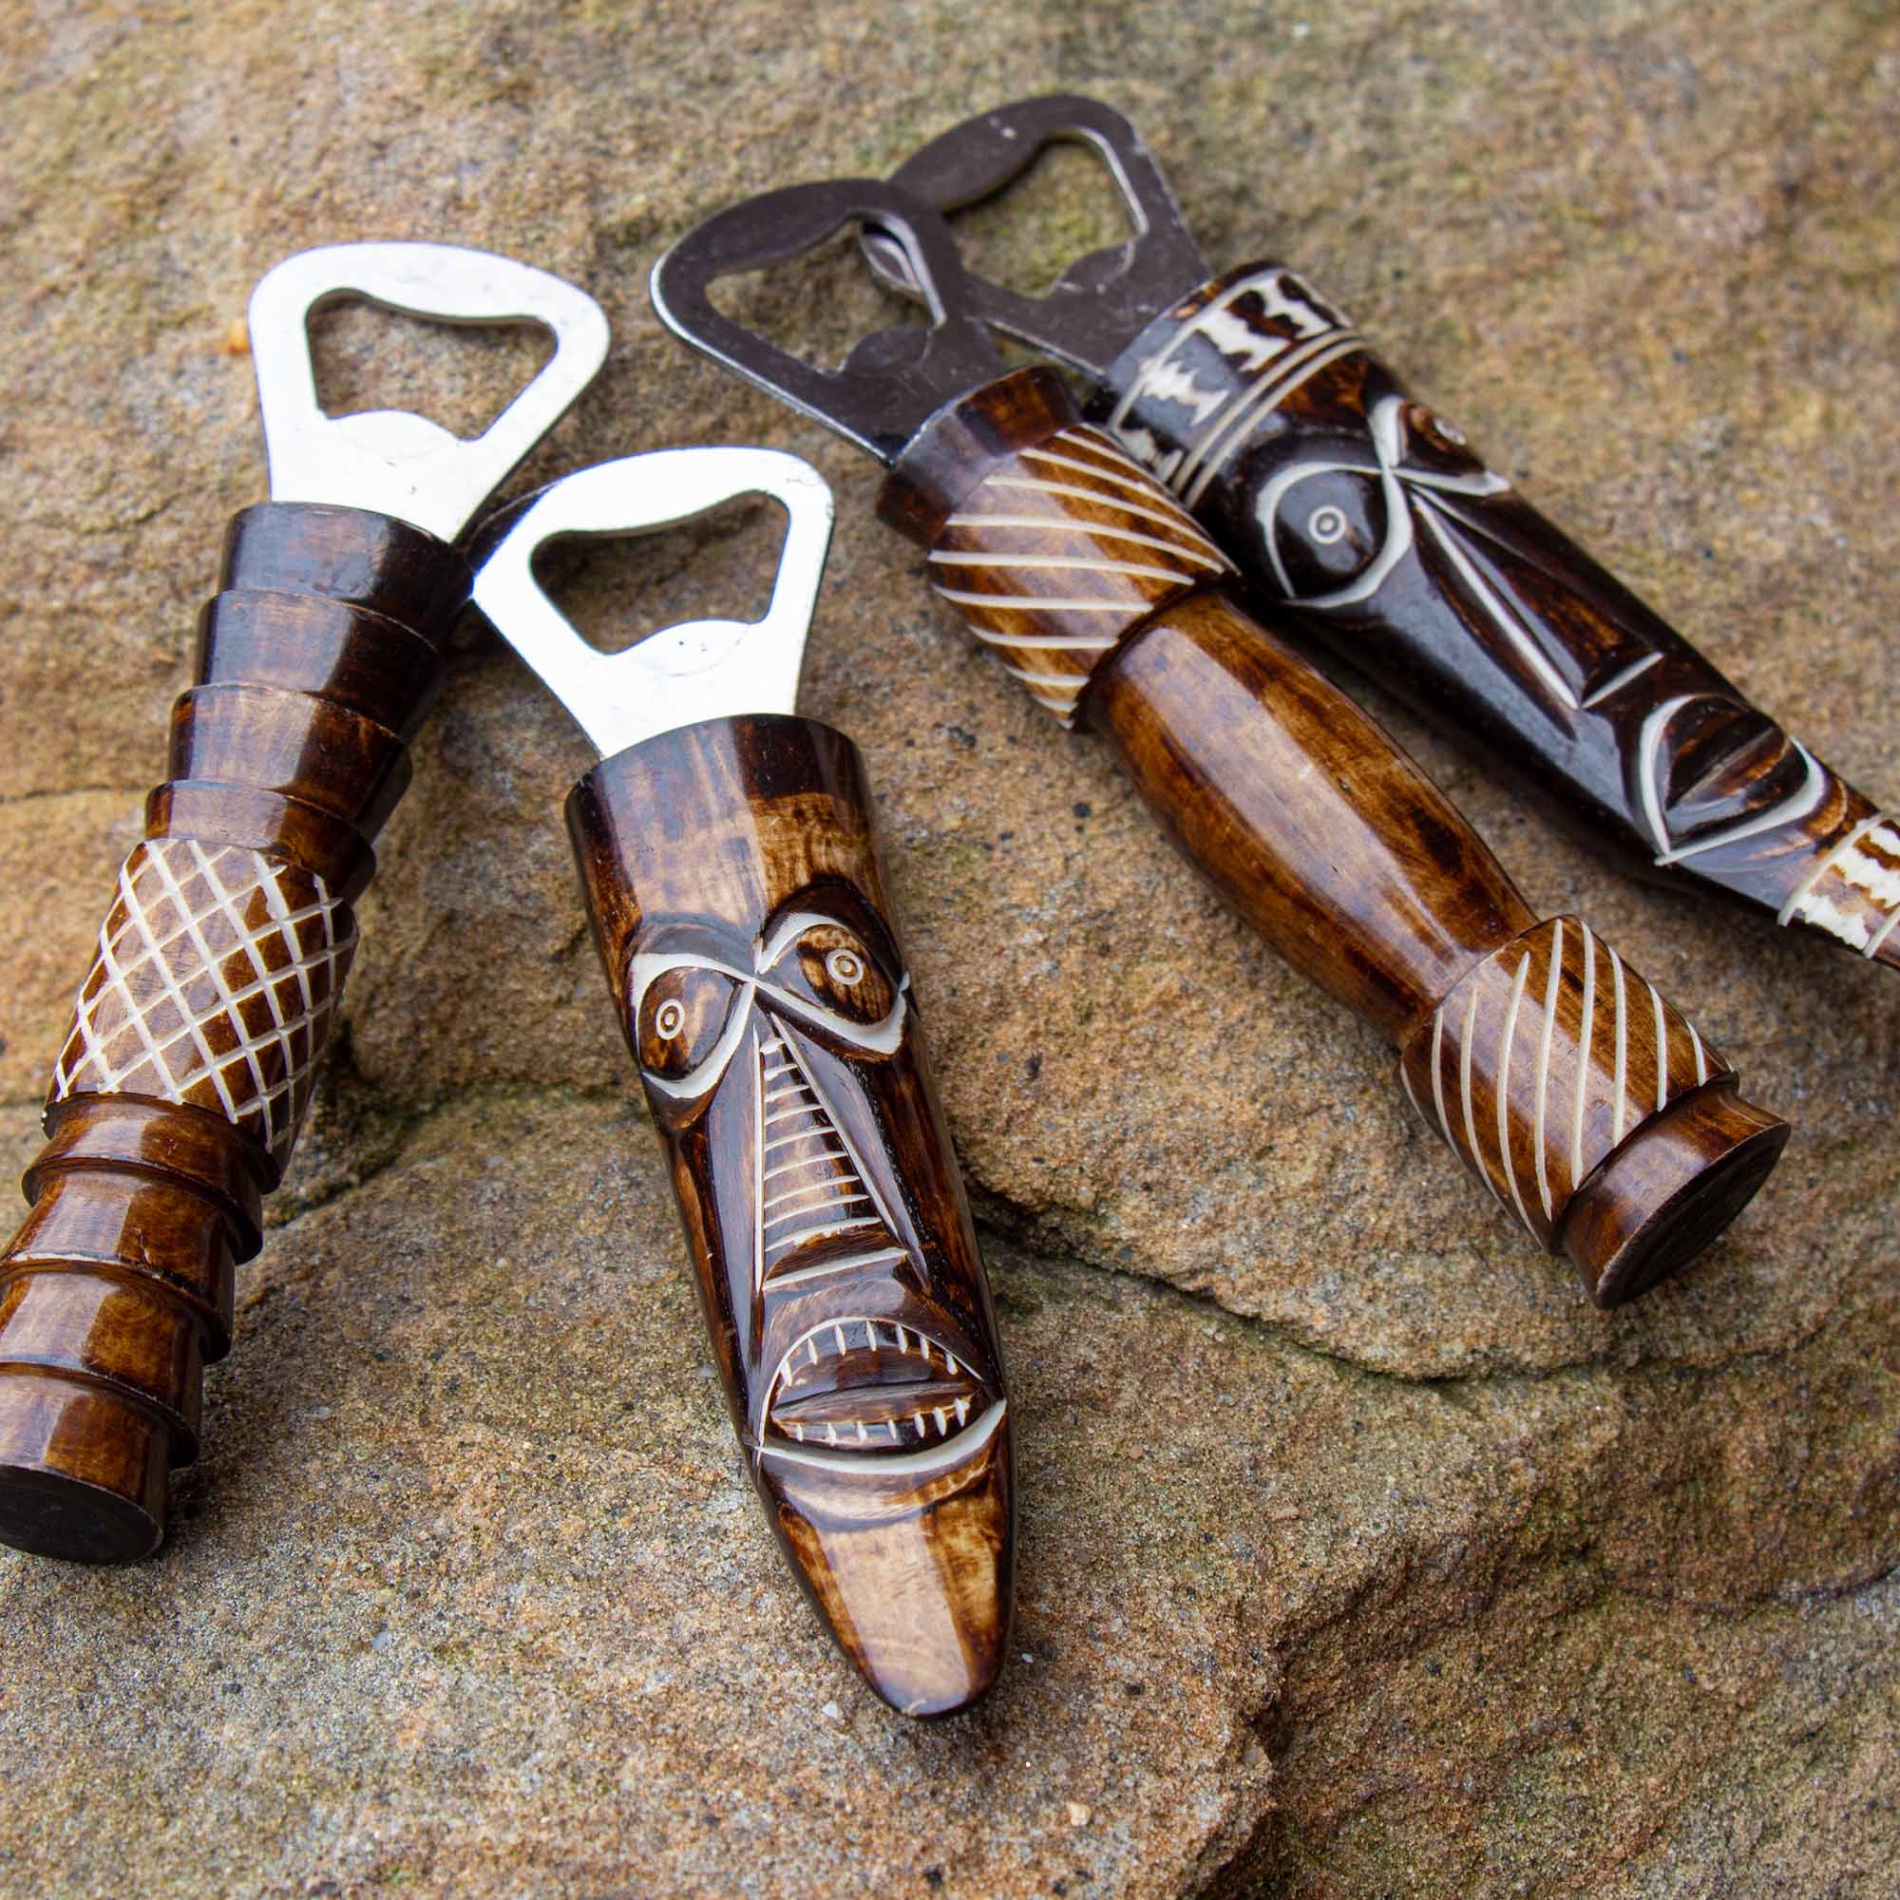 Pop Bottles With Style: Discover The Coolest Bottle Opener Designs!